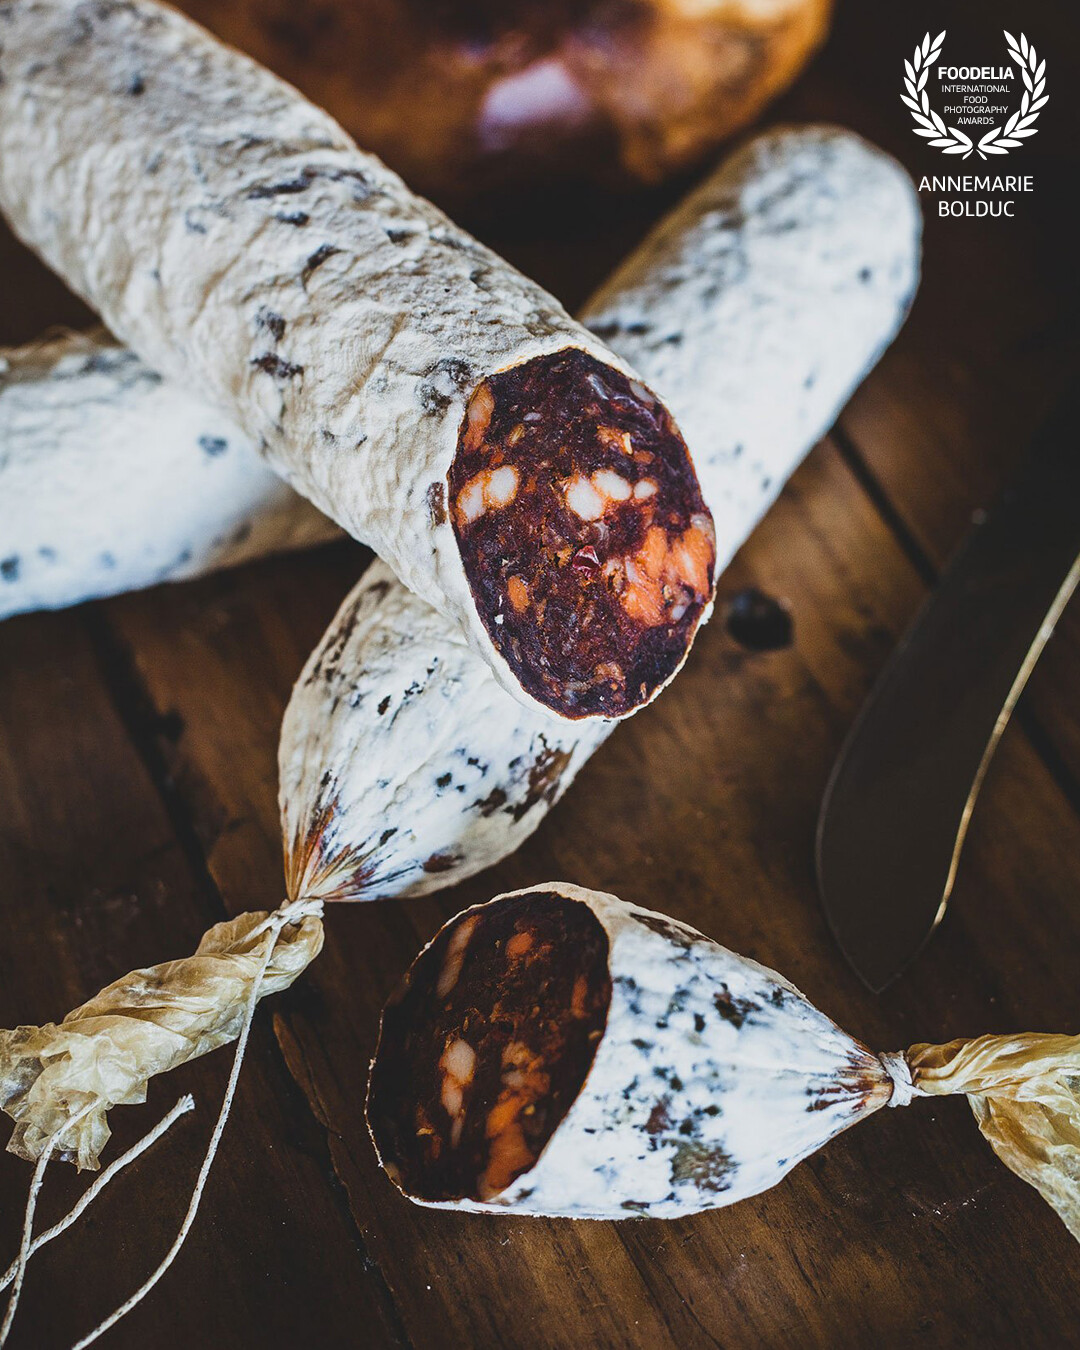 What I love about culinary photography is discovering and observing the process of foods, and telling a visual story. This salami was about to be removed from the moulded skin and was homemade by an Australian family who gathers each year to craft it.